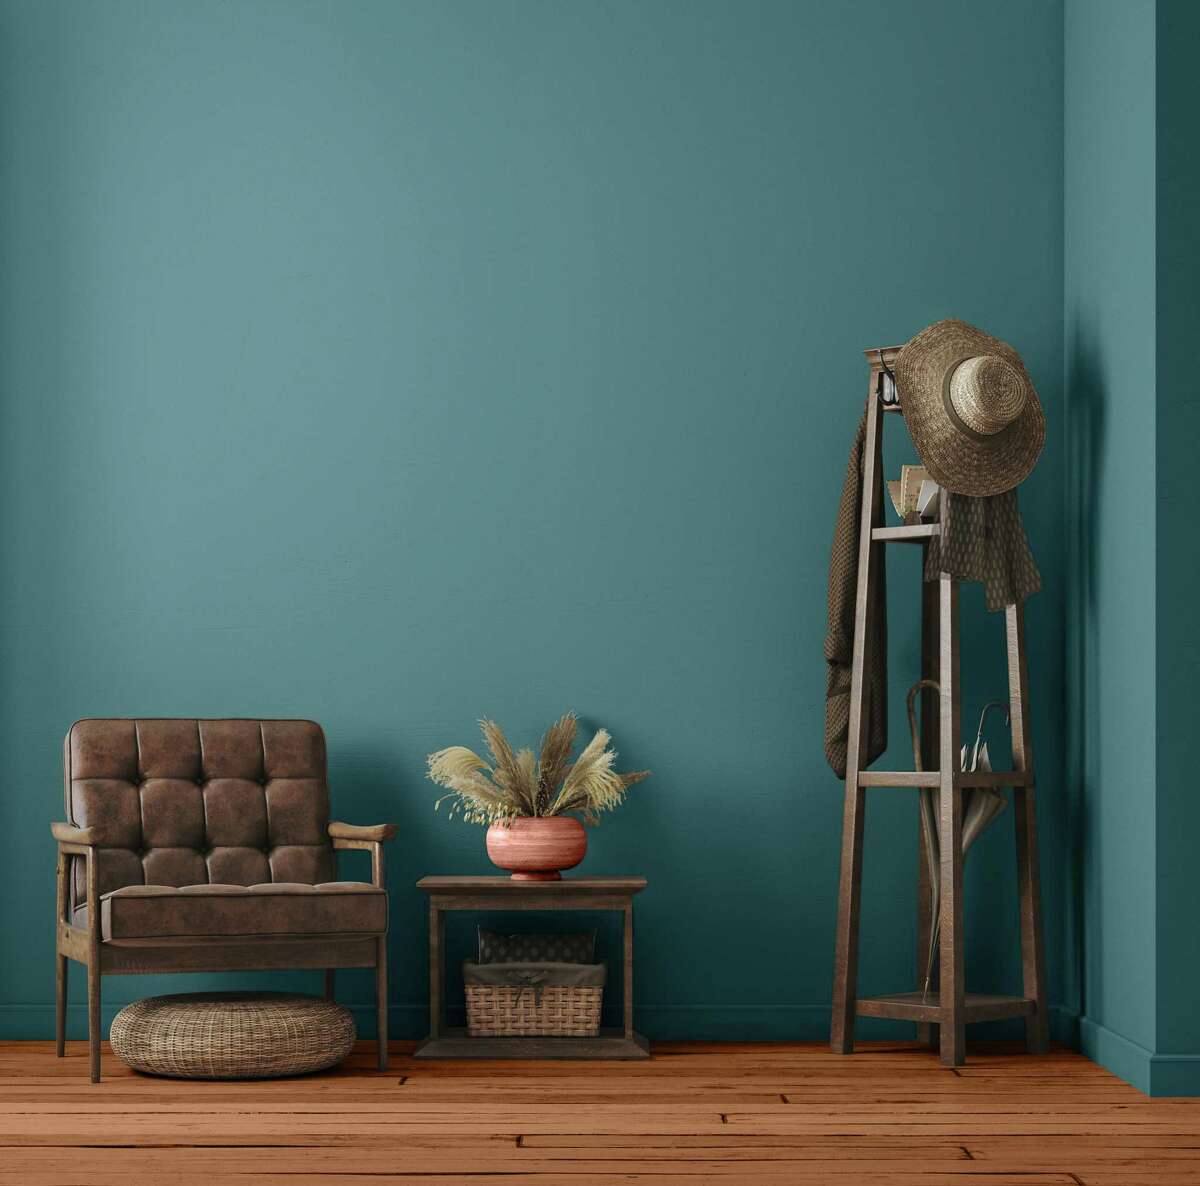 Glidden by PPG has named Vining Ivy as its 2023 Color of the Year.